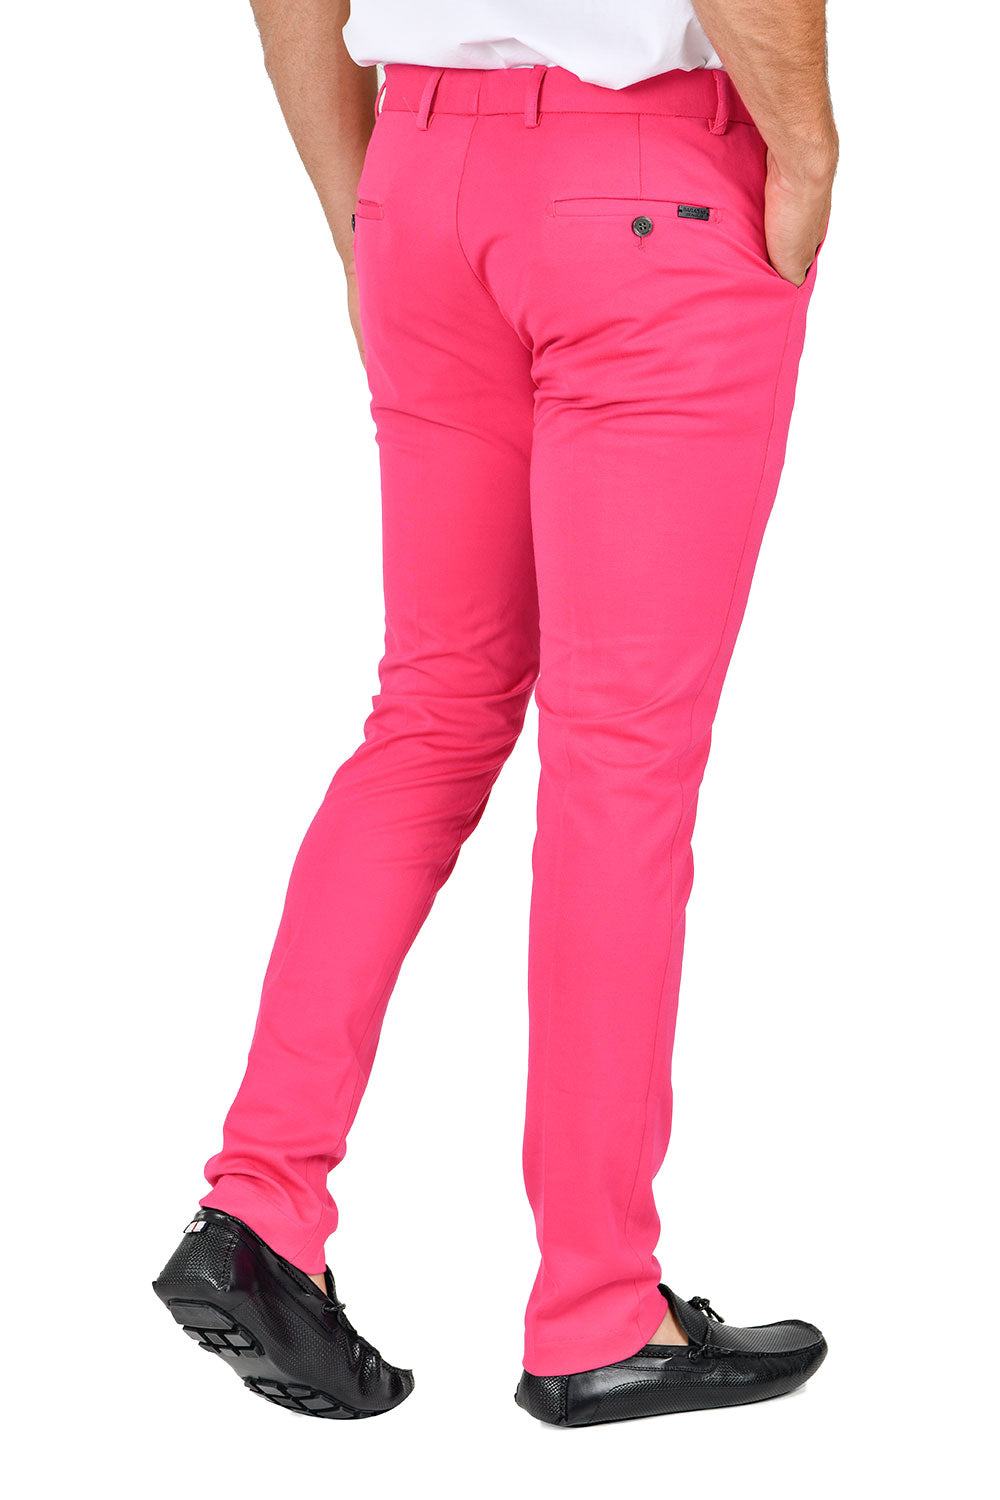 Barabas Men's Solid Color Basic Essential Chino Dress Pants CP4007 Fuchsia